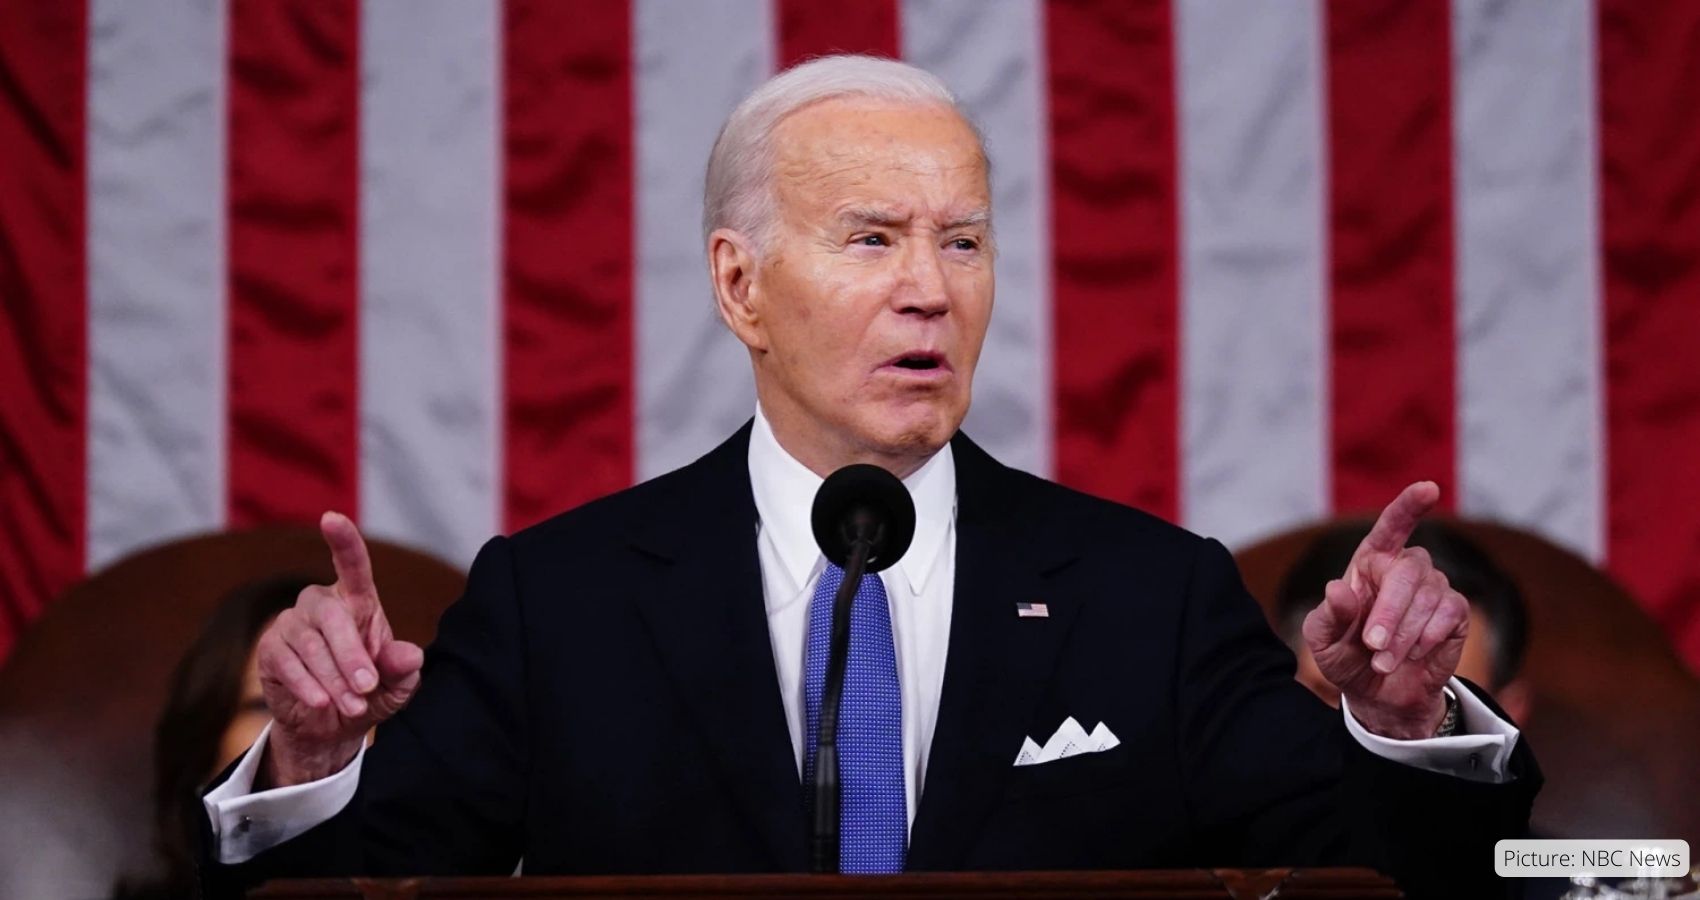 Feature and Cover Growing Doubts Over Biden’s Mental Fitness Set Stage for State of the Union Showdown